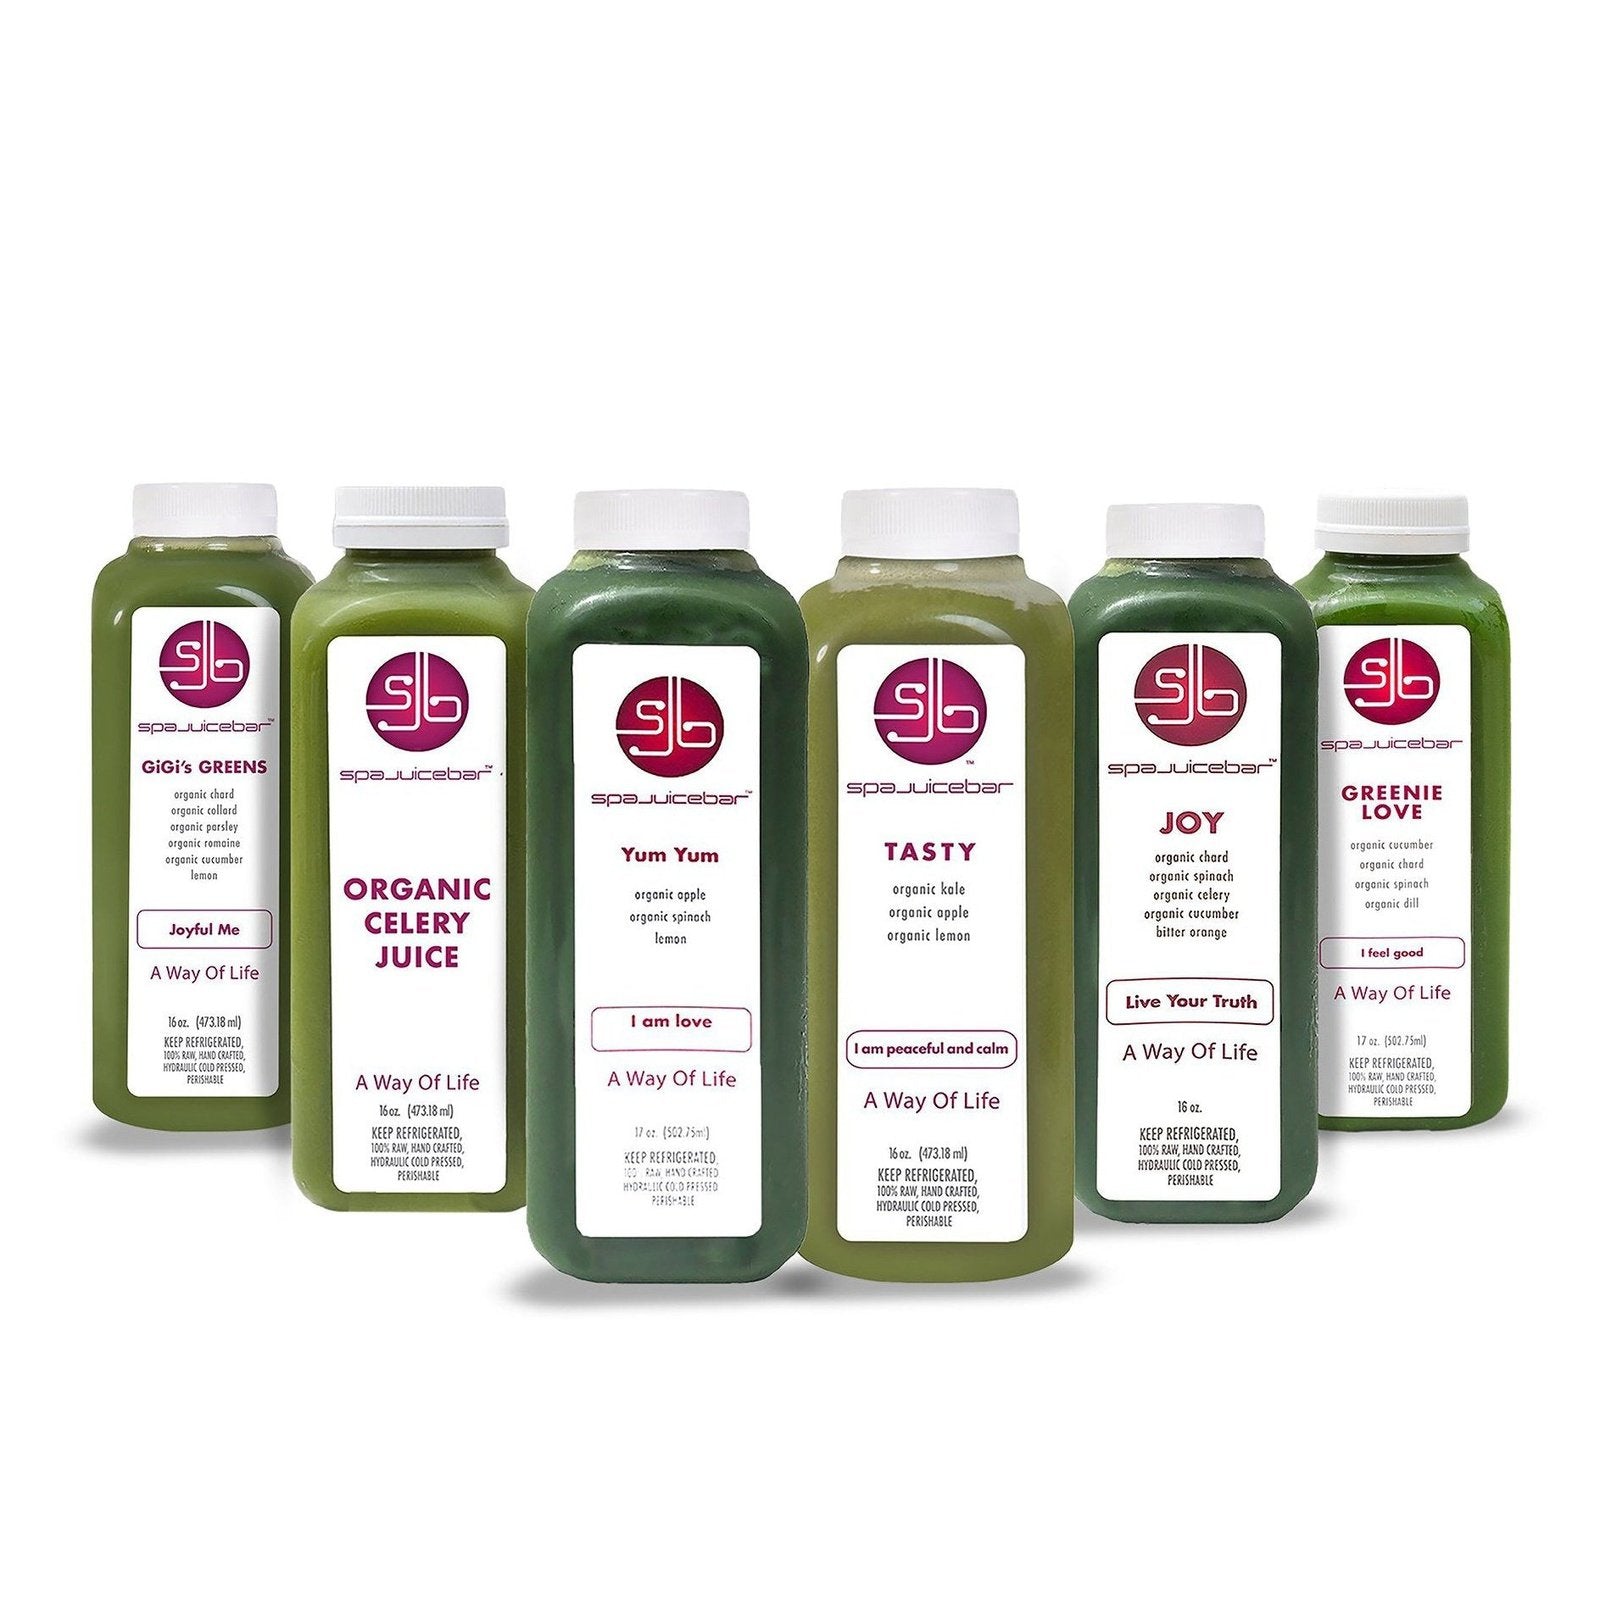 SpaJuiceBar's Green Juice Cleanse consist of 6 green juices per day. You choose